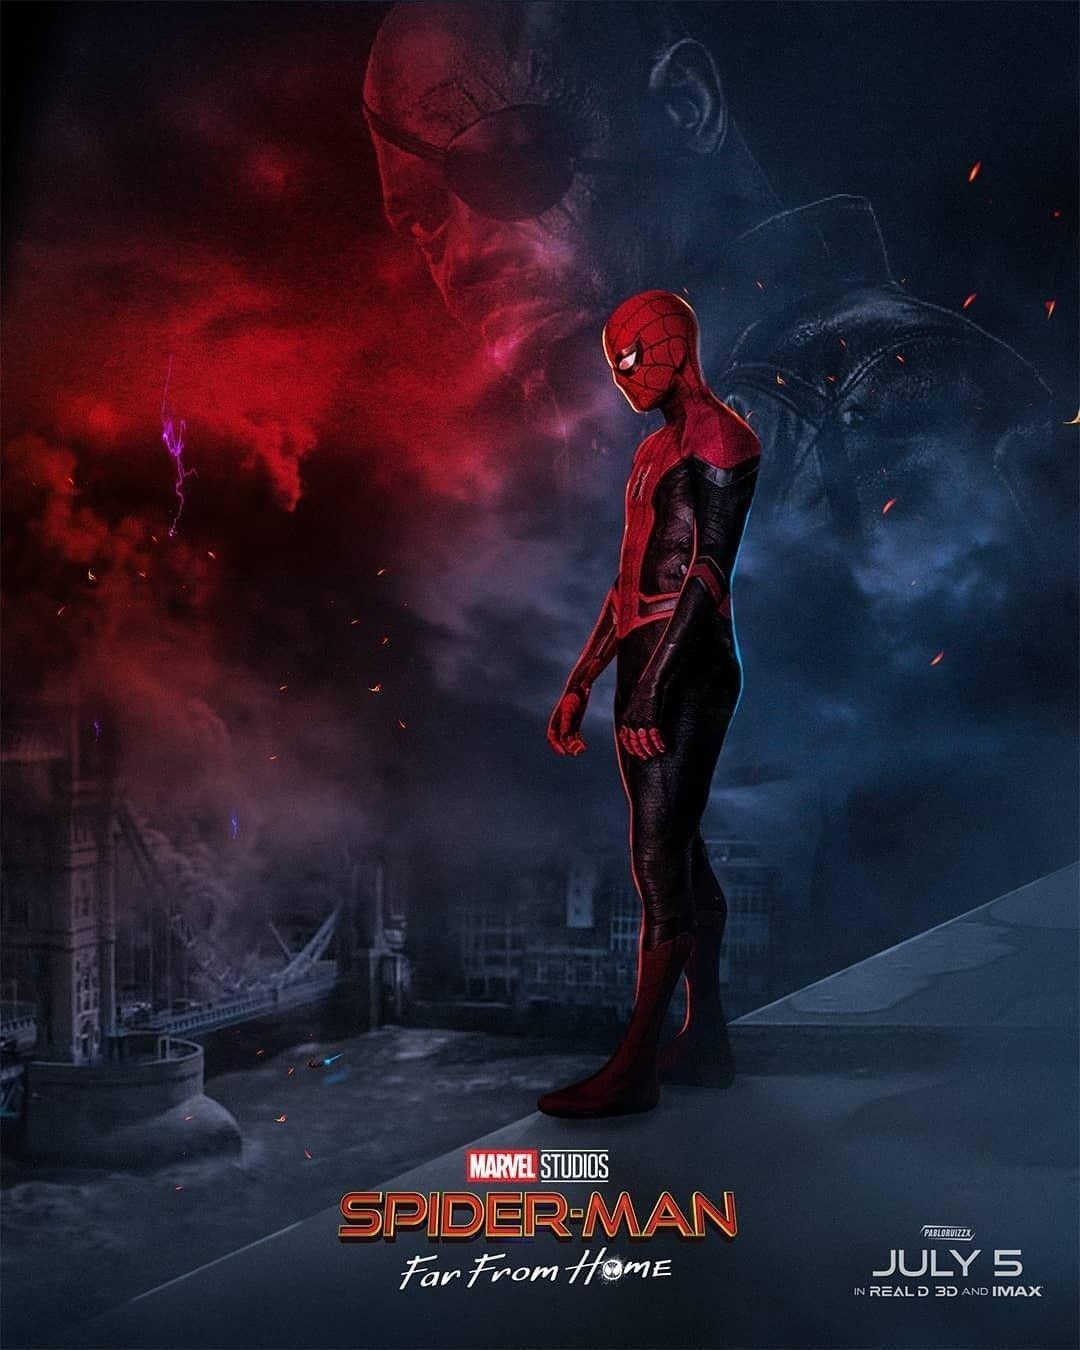 Free Download Spider Man Far From Home Wallpaper 4k Spiderman [1080x1350] For Your Desktop, Mobile & Tablet. Explore Spider Man: Far From Home Wallpaper. Spider Man: Far From Home Wallpaper